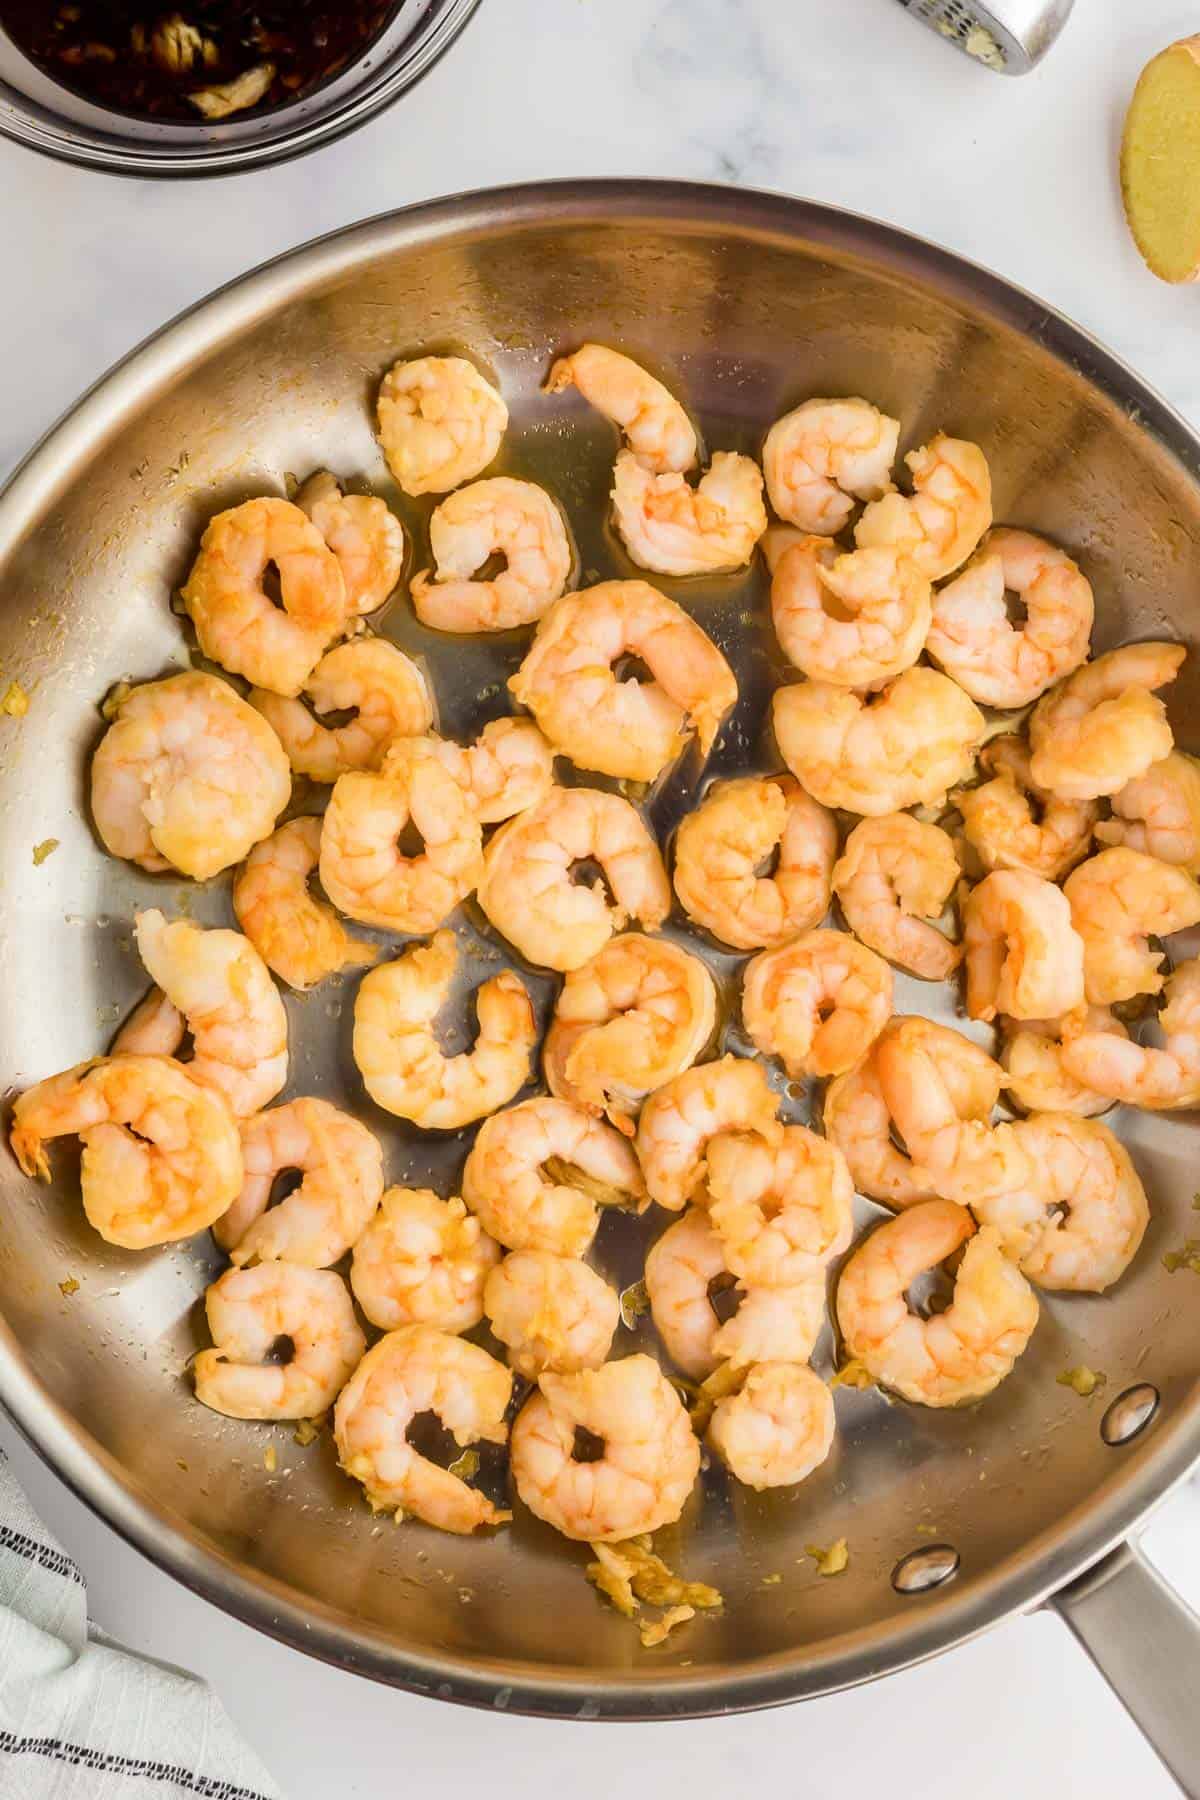 Shrimp being cooked in a frying pan.